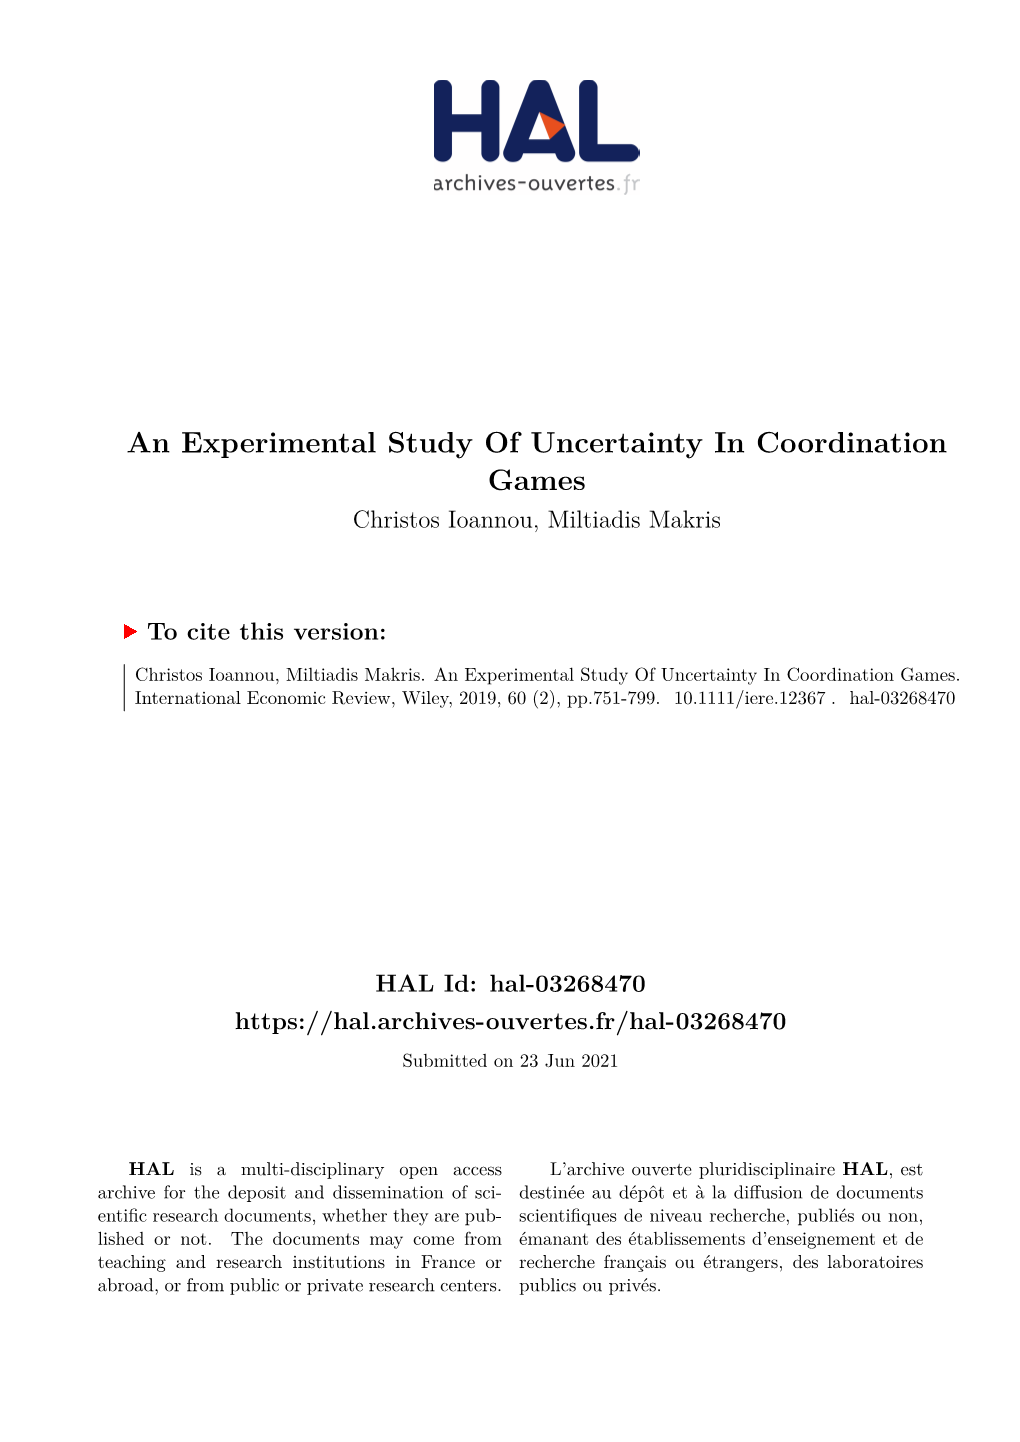 An Experimental Study of Uncertainty in Coordination Games Christos Ioannou, Miltiadis Makris